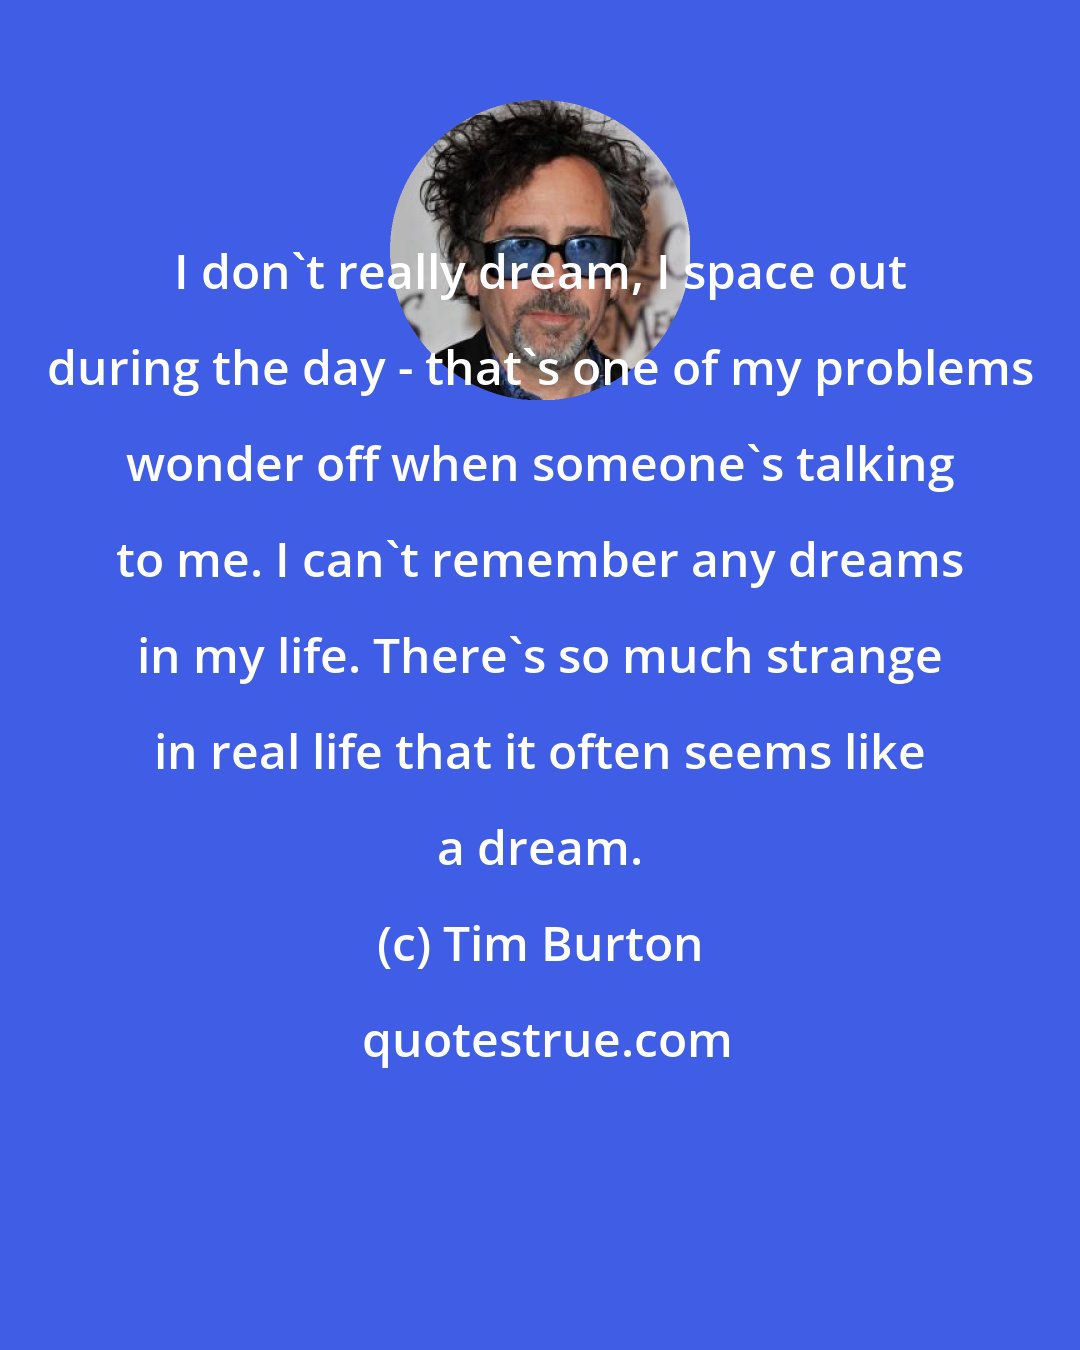 Tim Burton: I don't really dream, I space out during the day - that's one of my problems wonder off when someone's talking to me. I can't remember any dreams in my life. There's so much strange in real life that it often seems like a dream.